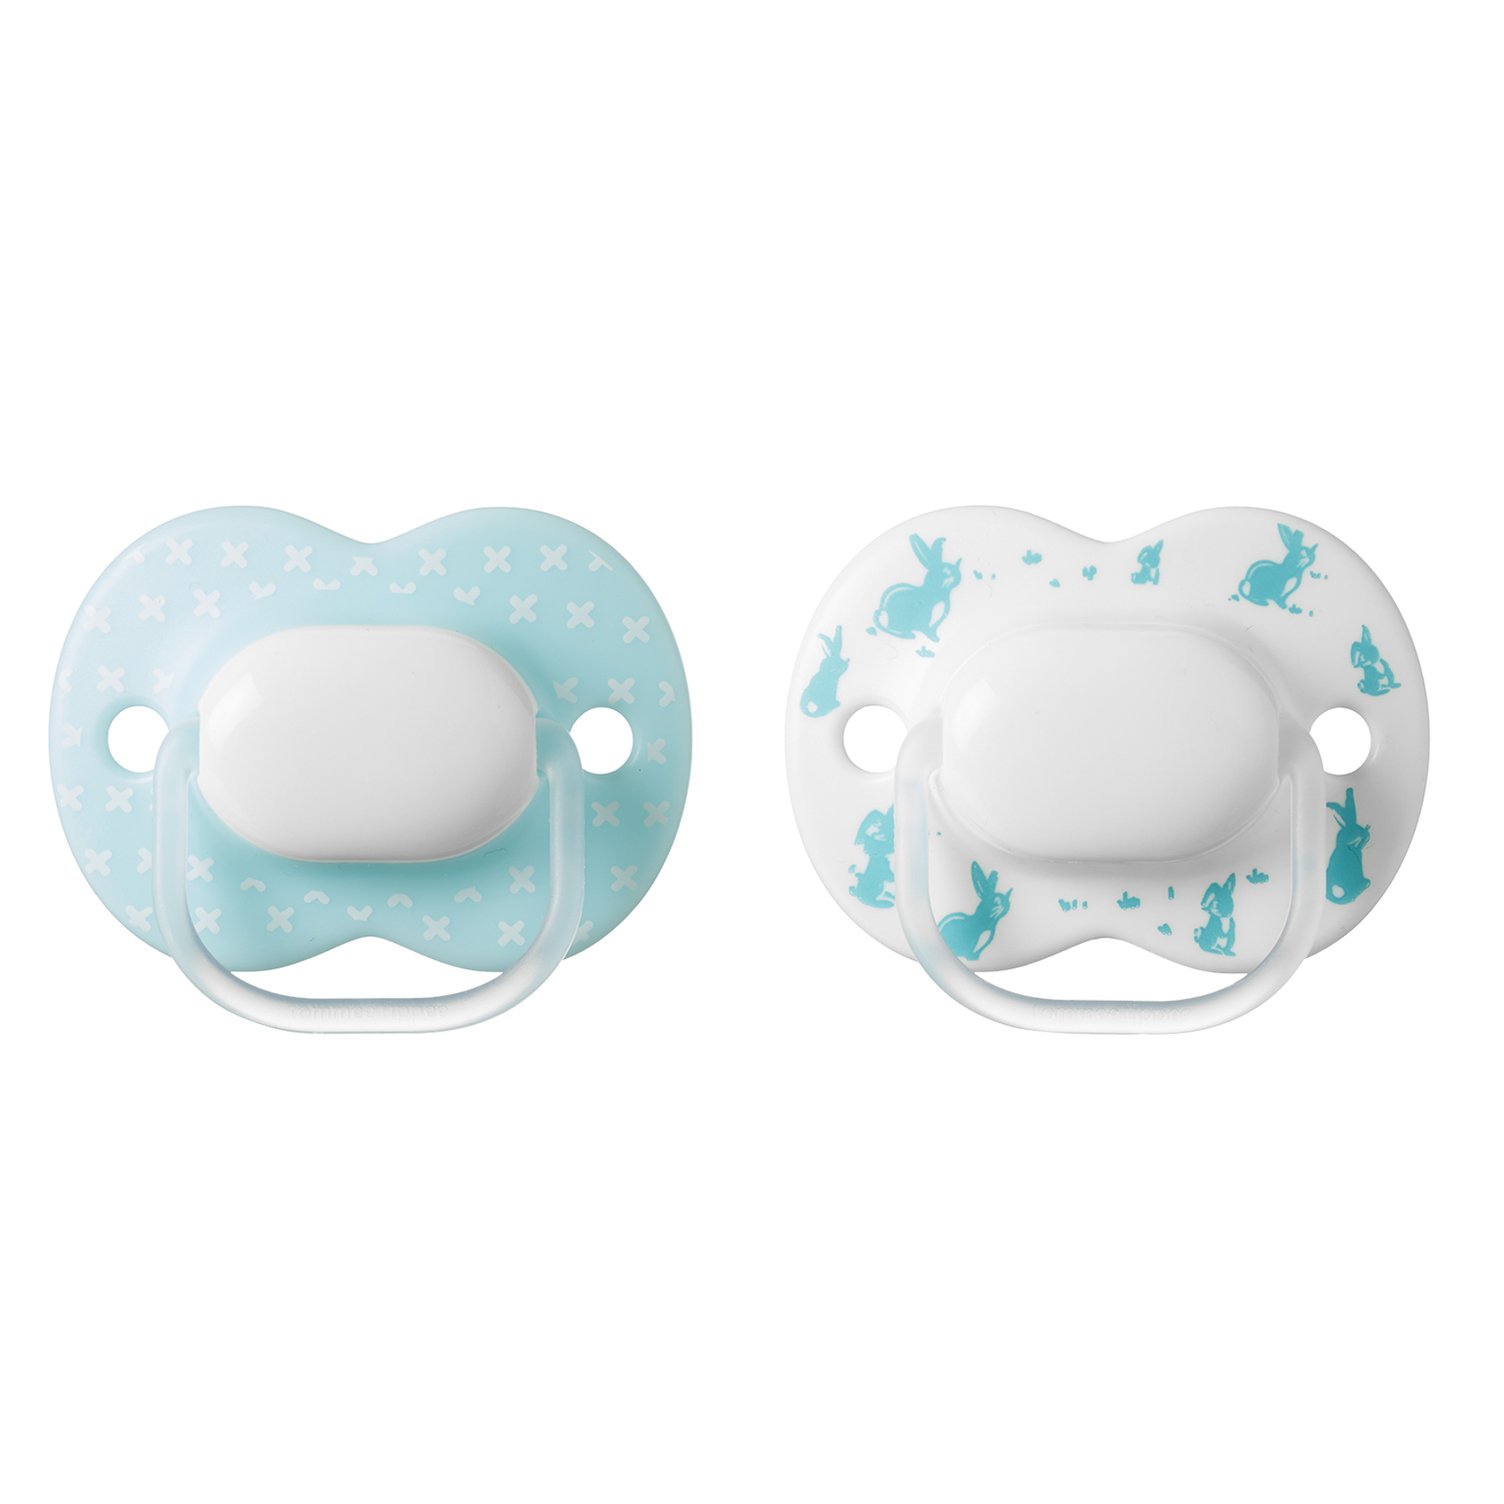 Book Cover Tommee Tippee Little London Pacifiers, Symmetrical Design, BPA-Free Silicone Binkies, 0-6m, 2-Count